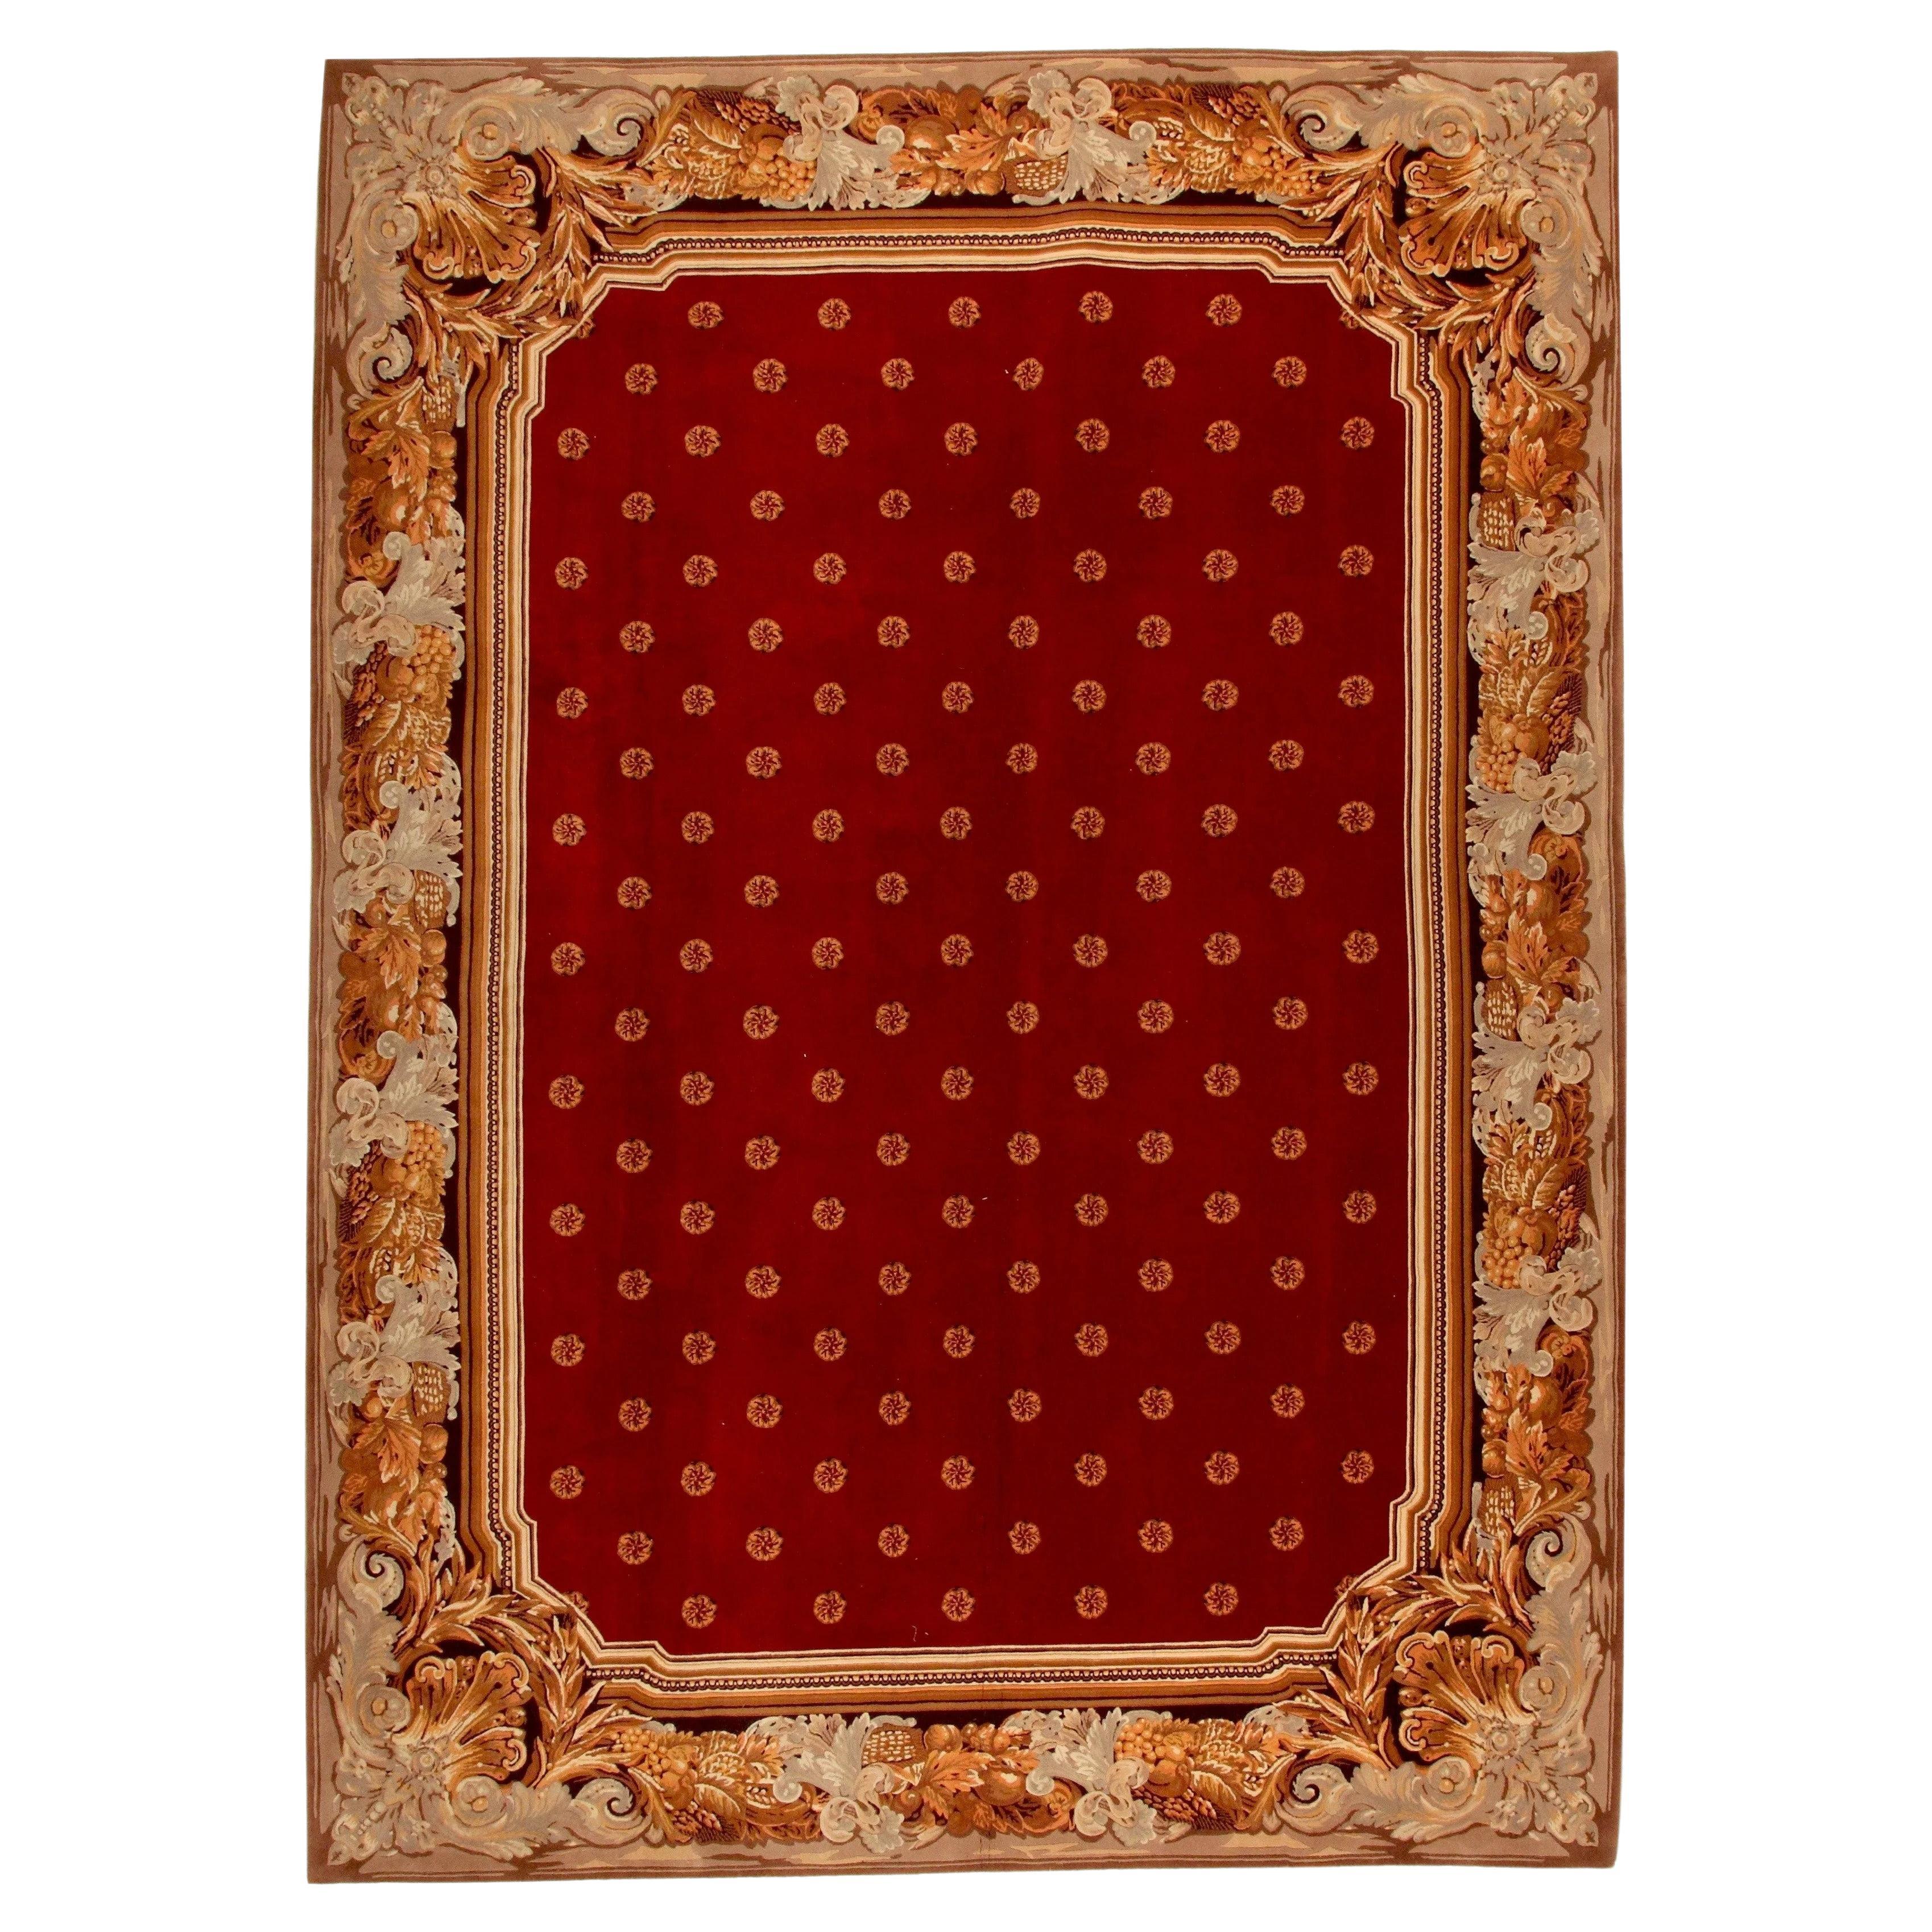 VIA COMO 'Ferutage Rosso' Hand Knotted Fine Wool Rug 9x12 ft RARE One of a Kind For Sale